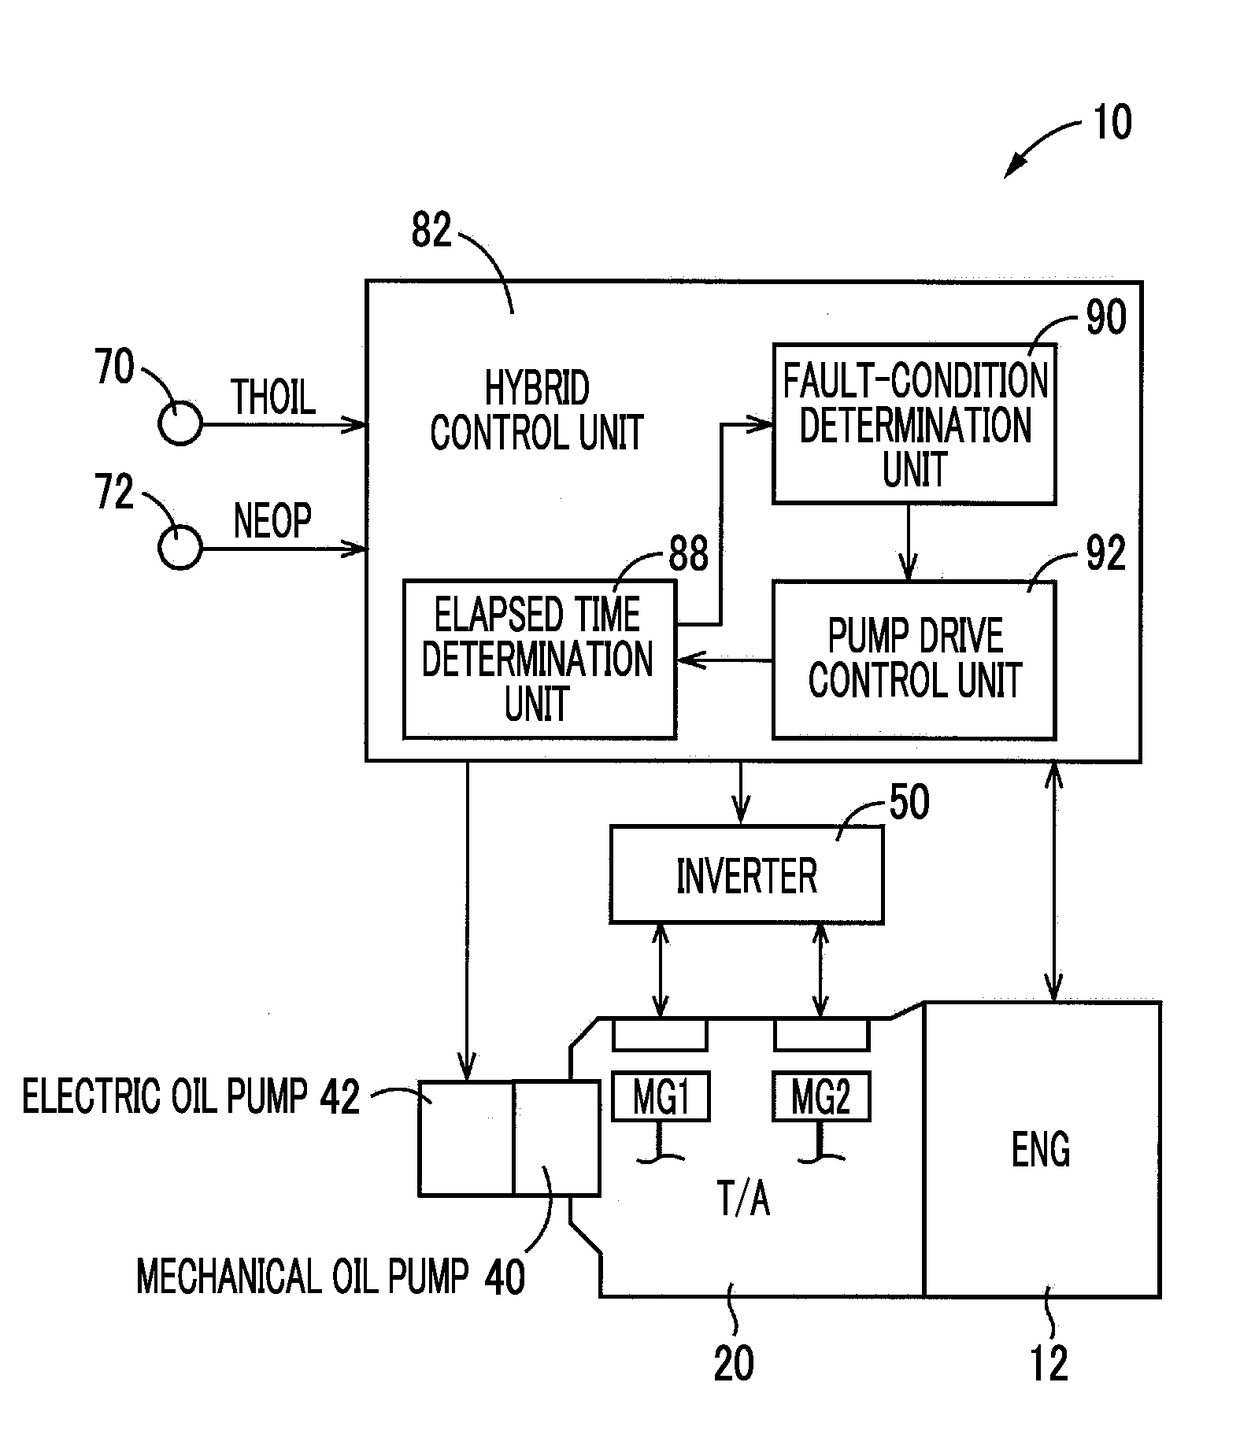 Power Transmission System For Vehicle